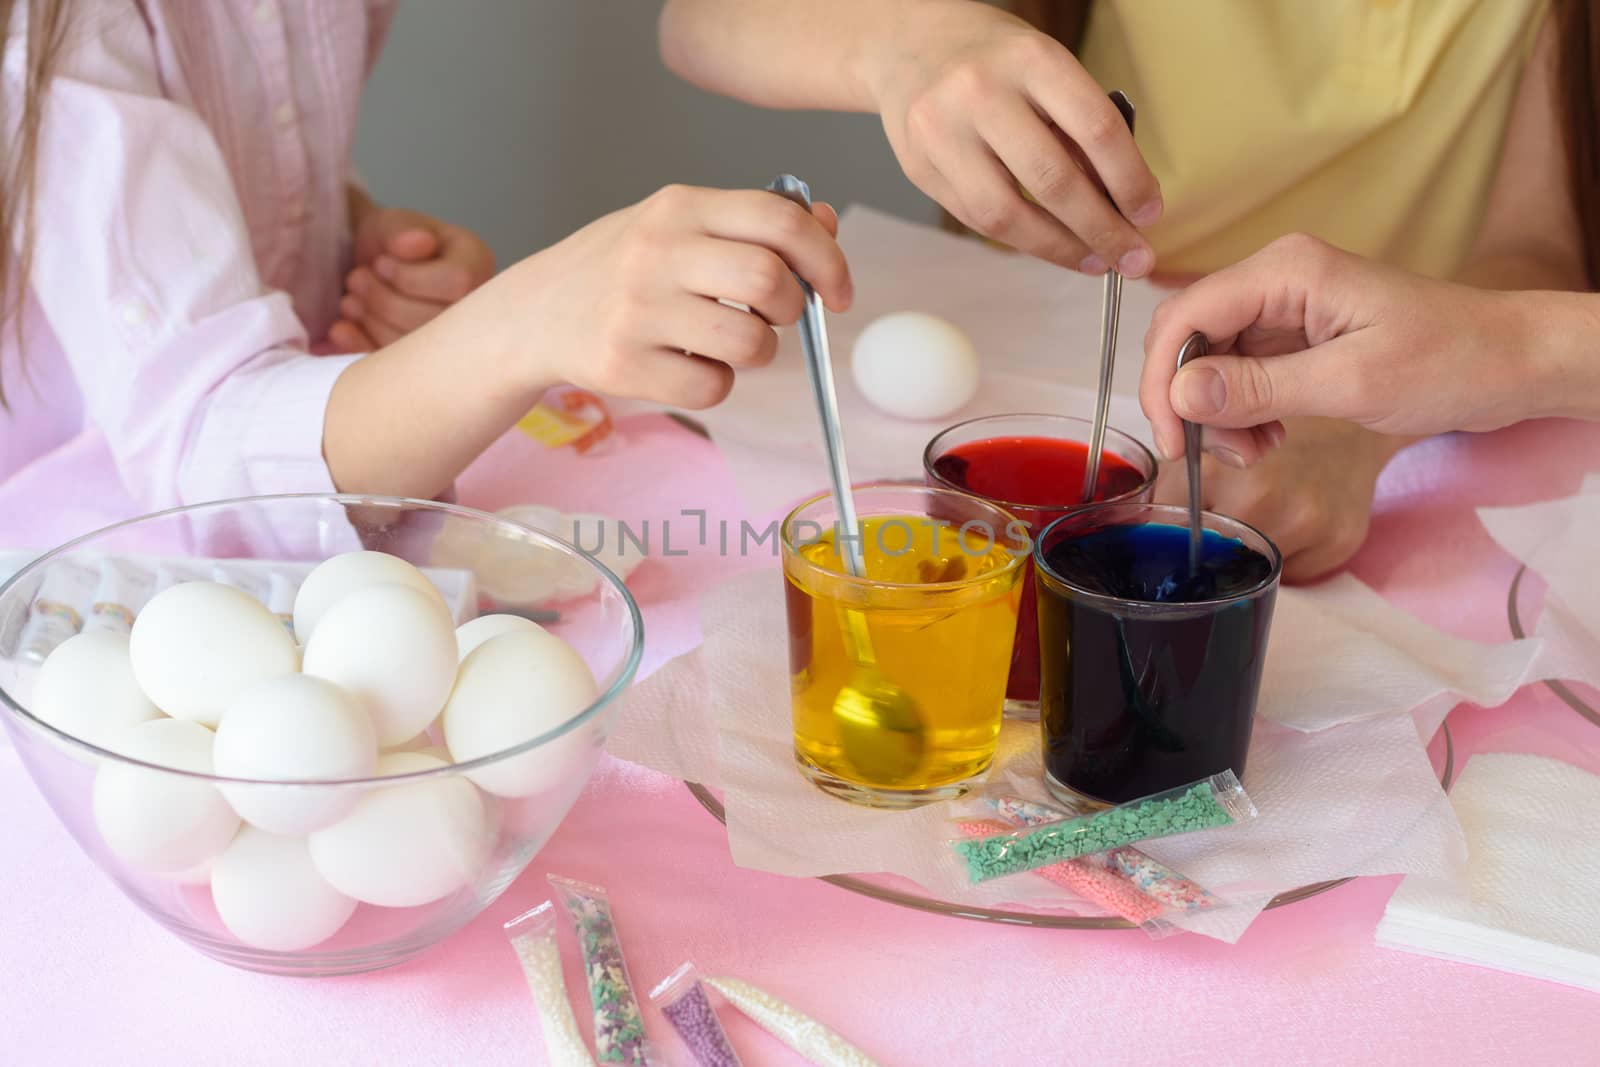 Children interfere with a solution with food coloring in glasses to paint Easter eggs by Madhourse